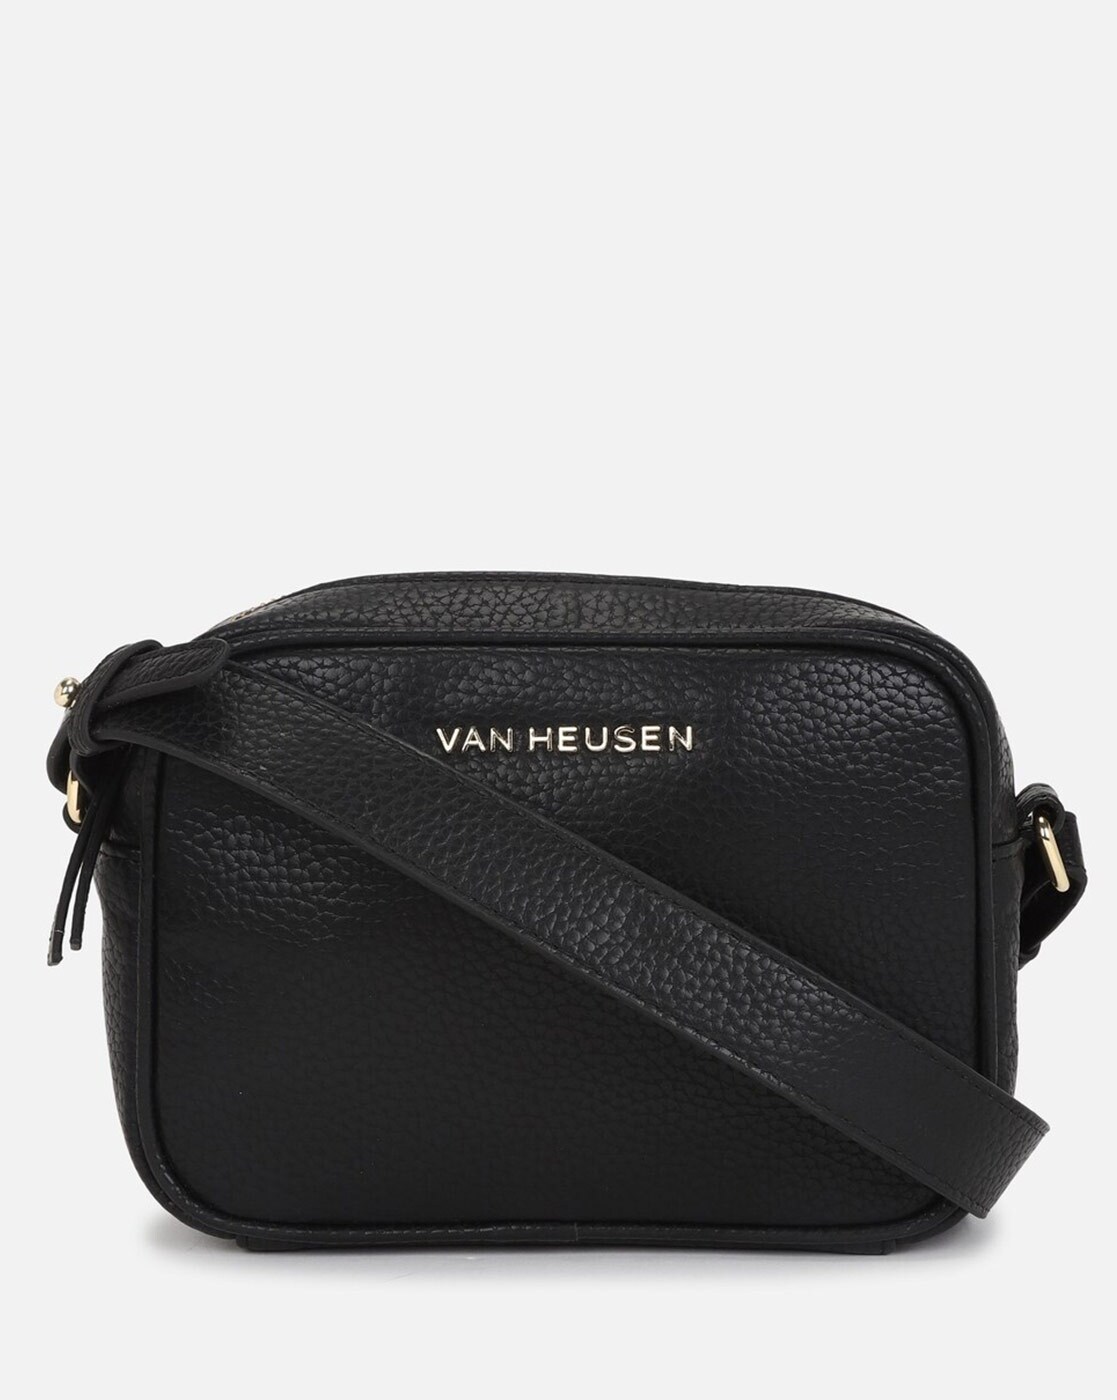 Brand new with tags Van Heusen Purse Black